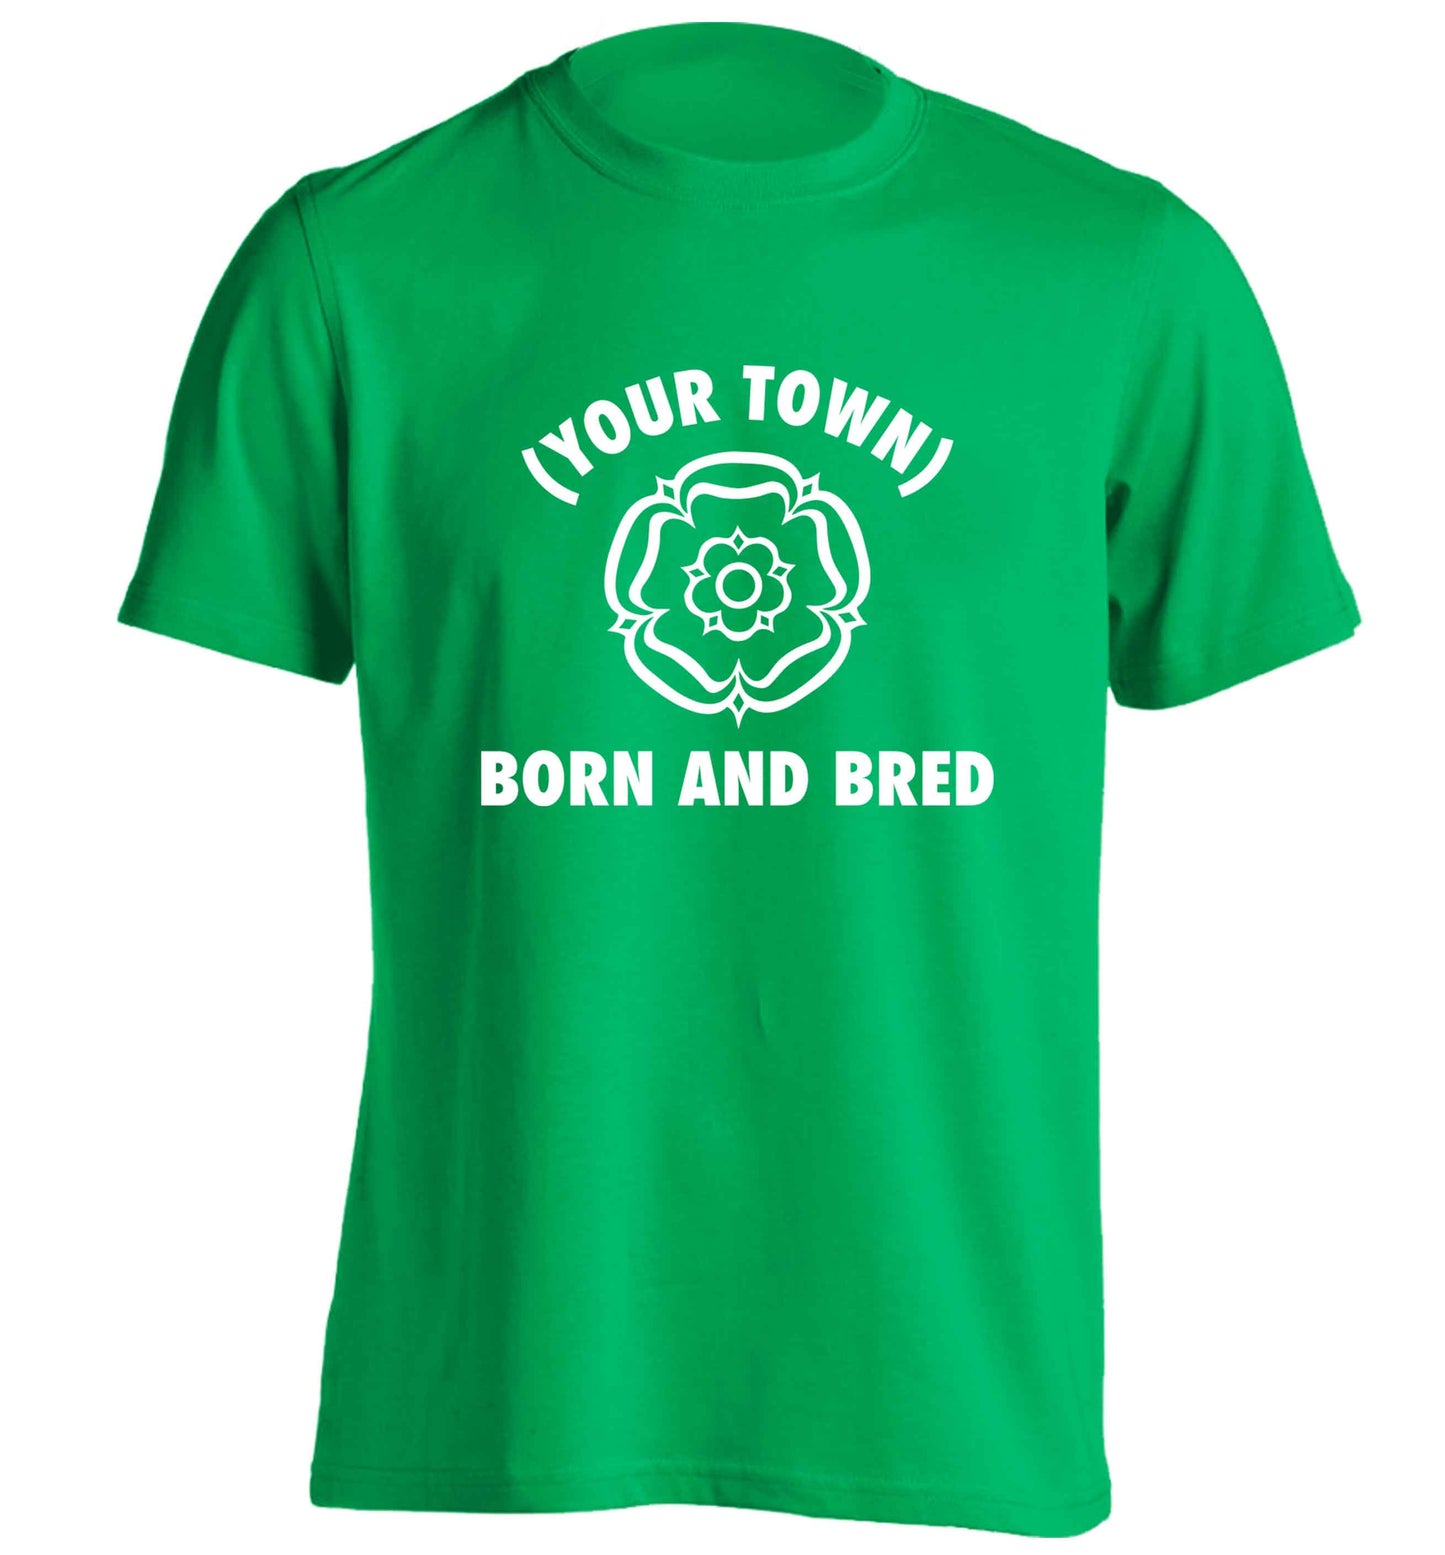 Personalised born and bred adults unisex green Tshirt 2XL